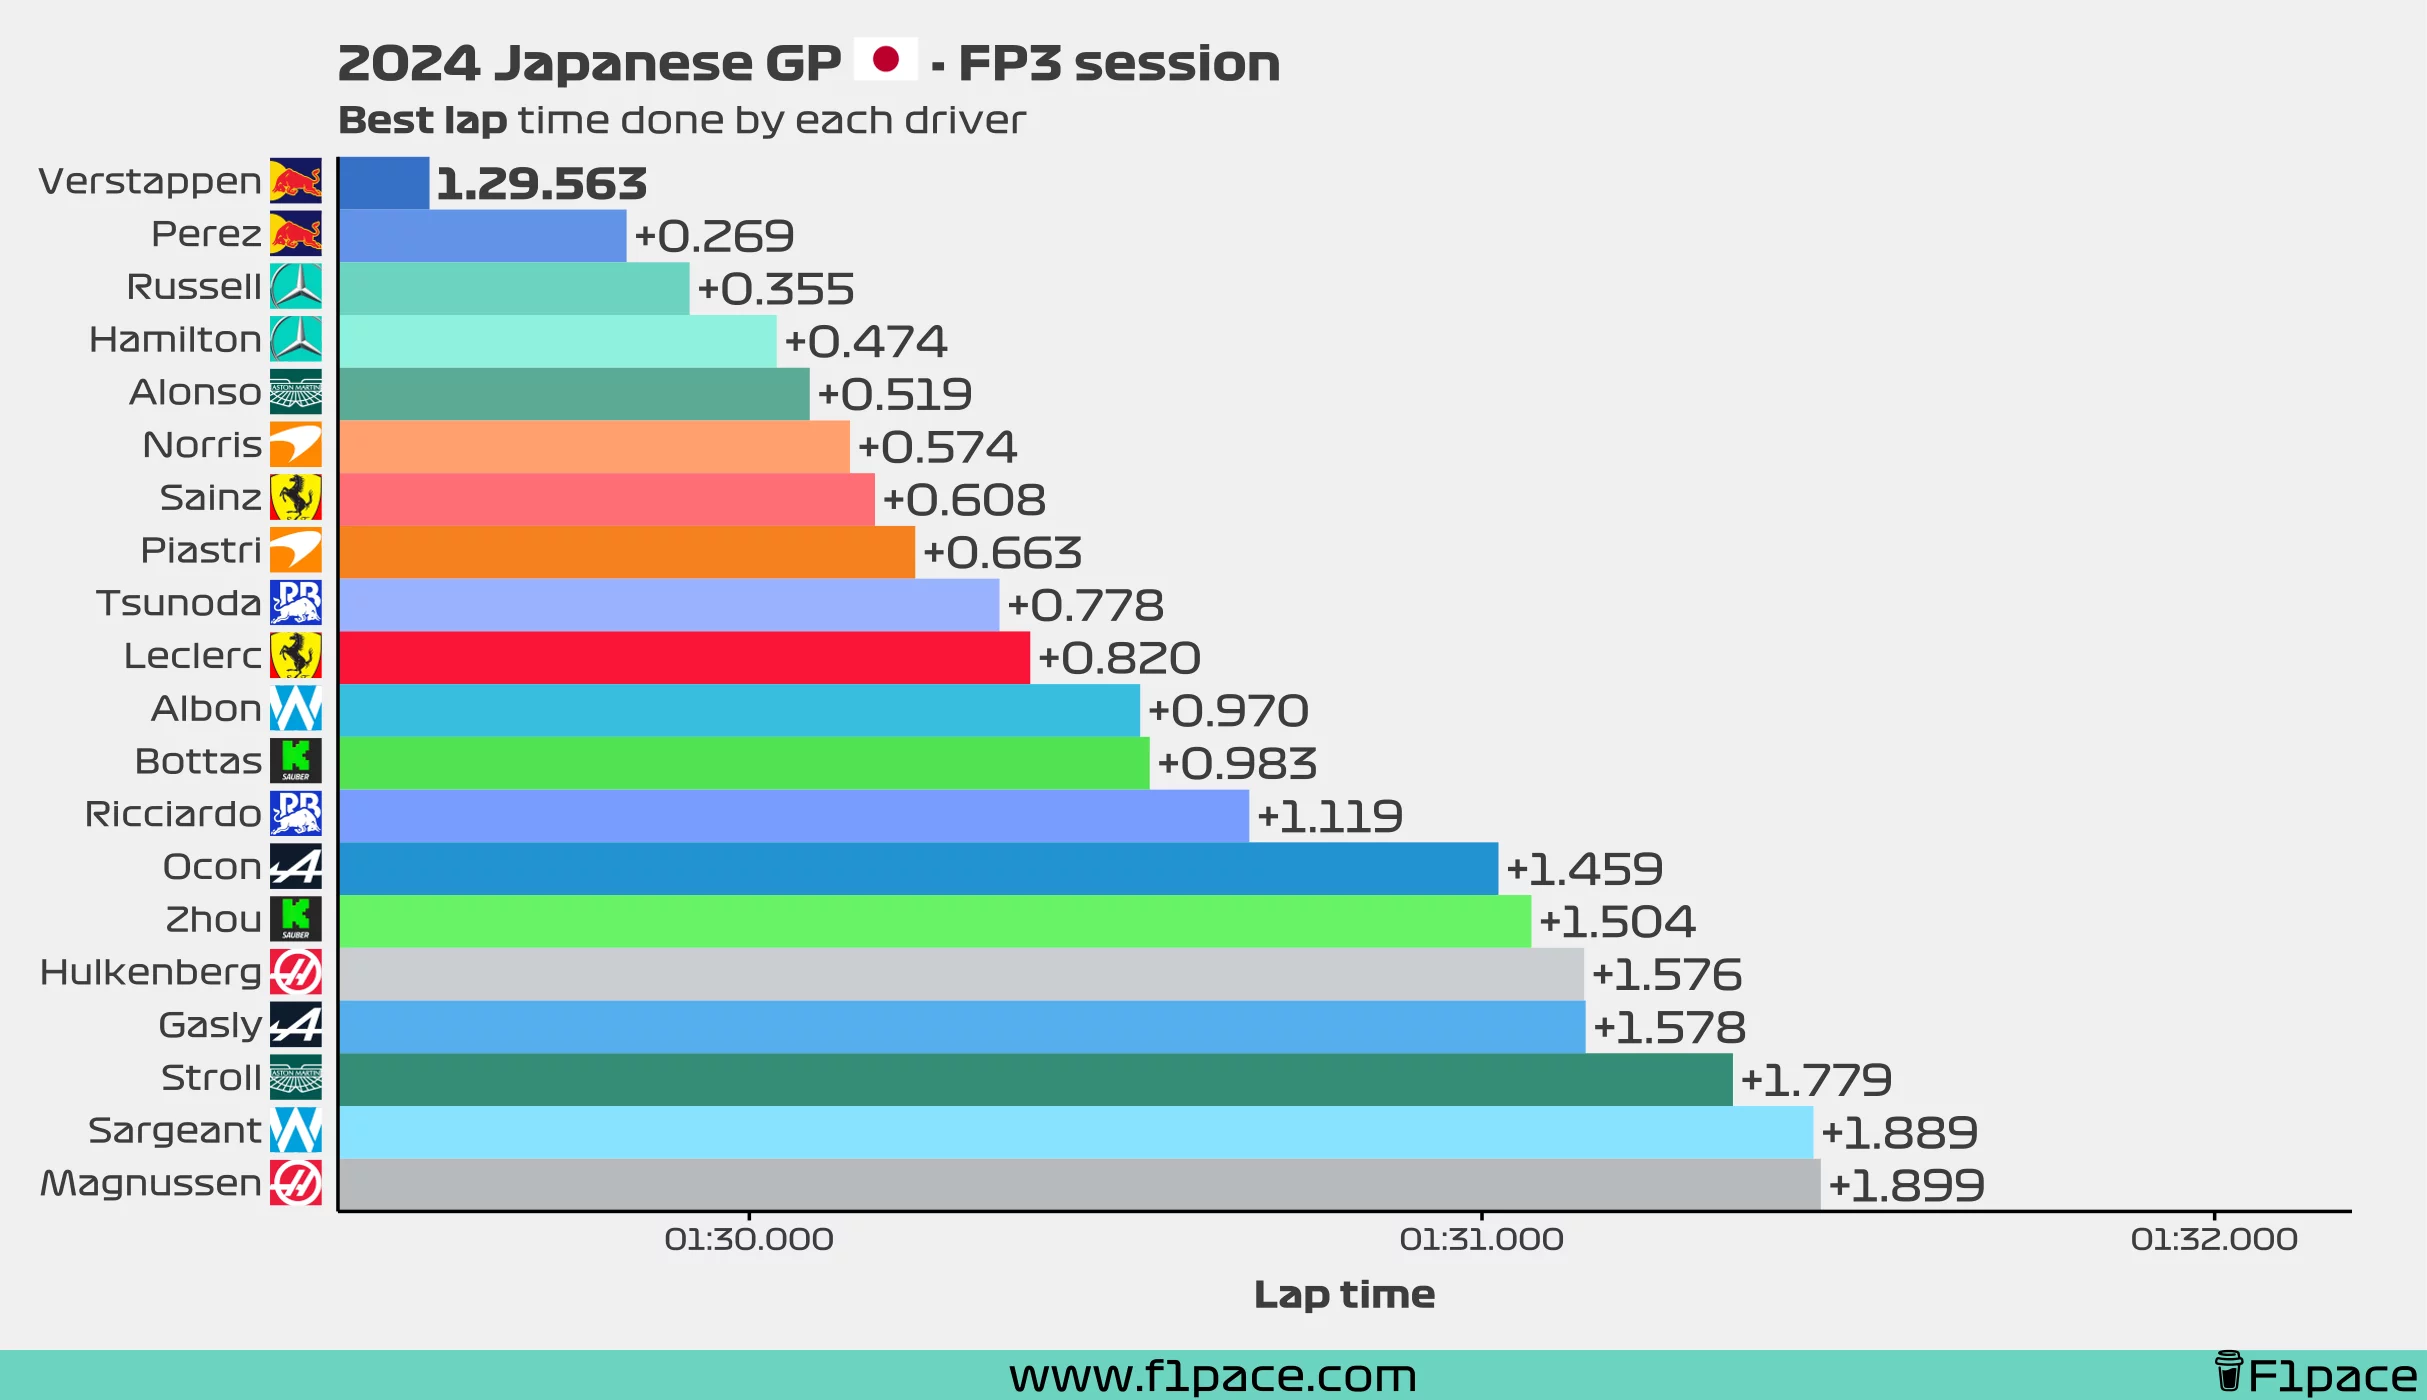 Best lap time for each driver